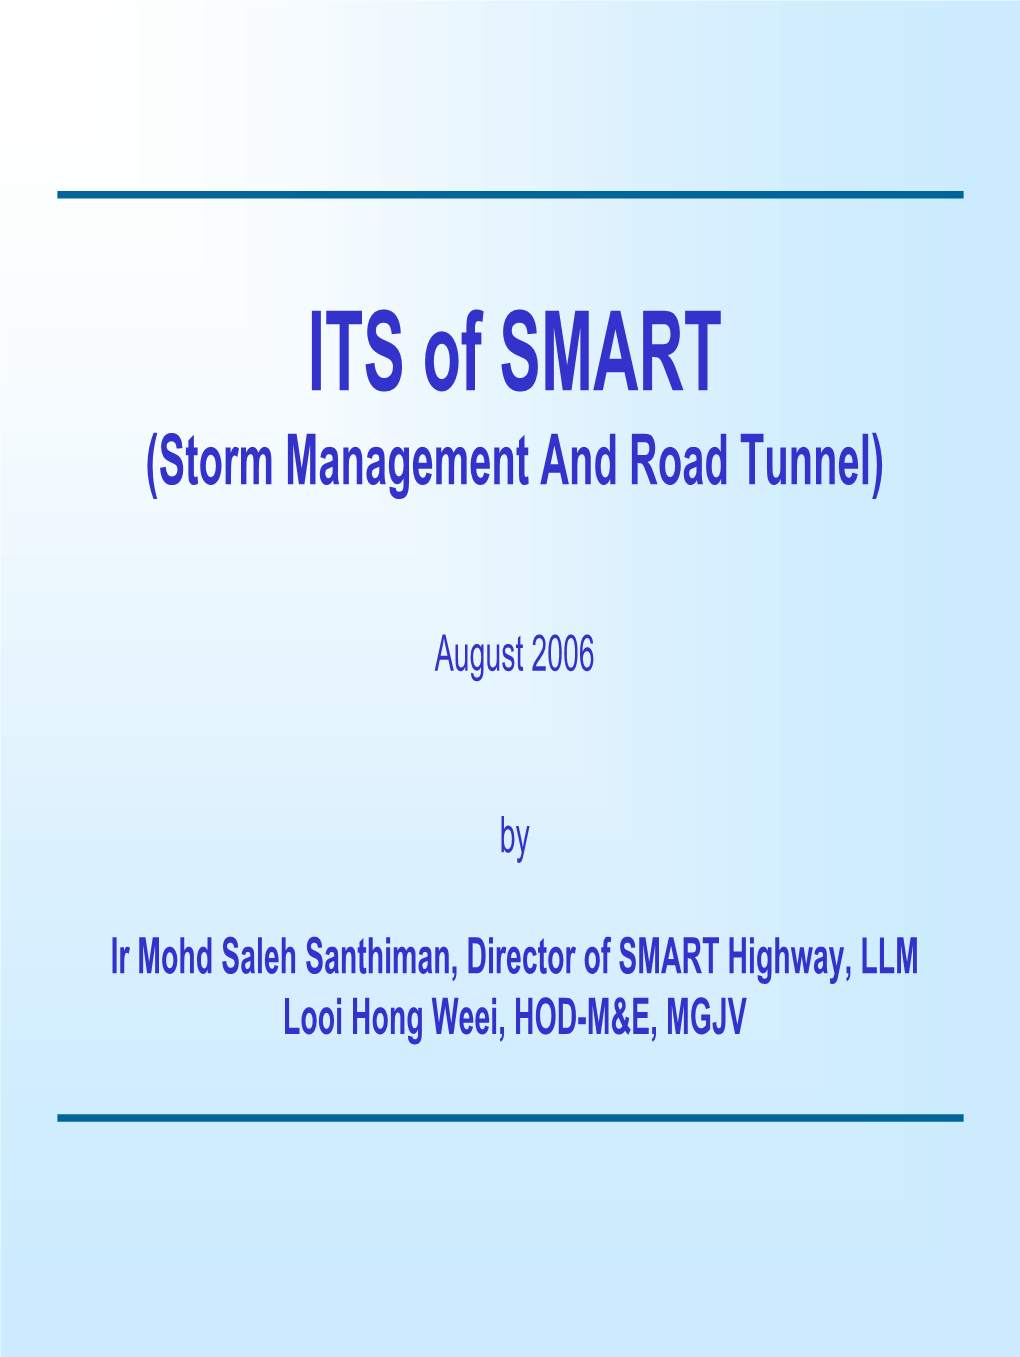 ITS of SMART (Storm Management and Road Tunnel)